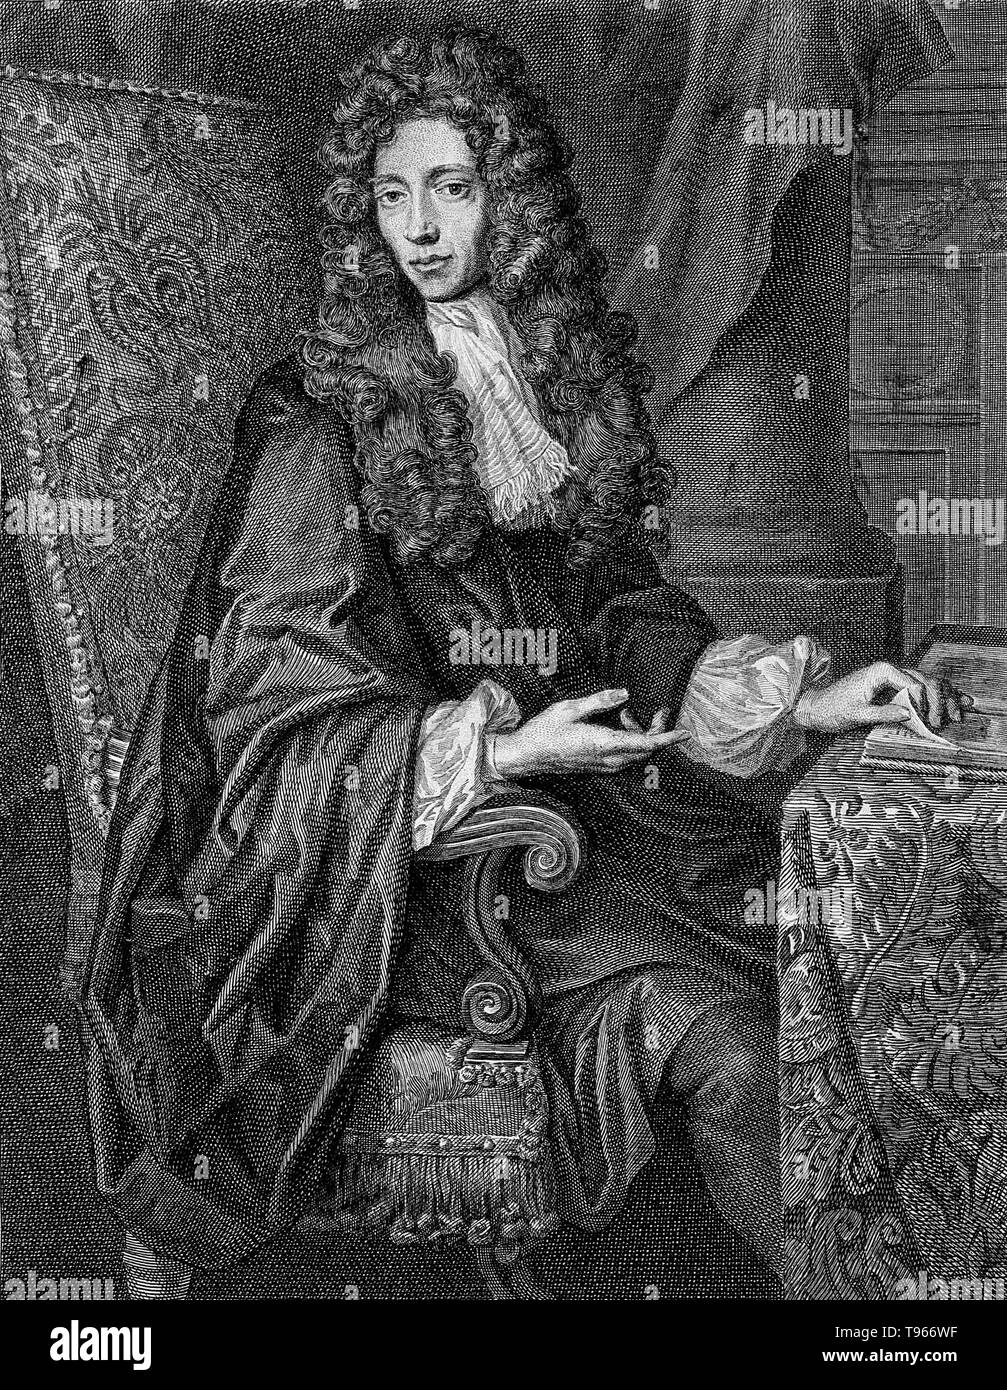 Robert Boyle (January 25, 1627 - December 31, 1691) was an Irish natural philosopher, chemist, physicist and inventor. He is regarded today as the first modern chemist, and one of the pioneers of modern experimental scientific method. Among his works, The Sceptical Chymist, published in 1661, is seen as a cornerstone book in the field of chemistry. He was a devout and pious Anglican and is noted for his writings in theology. He died in 1691 at the age of 64. Stock Photo